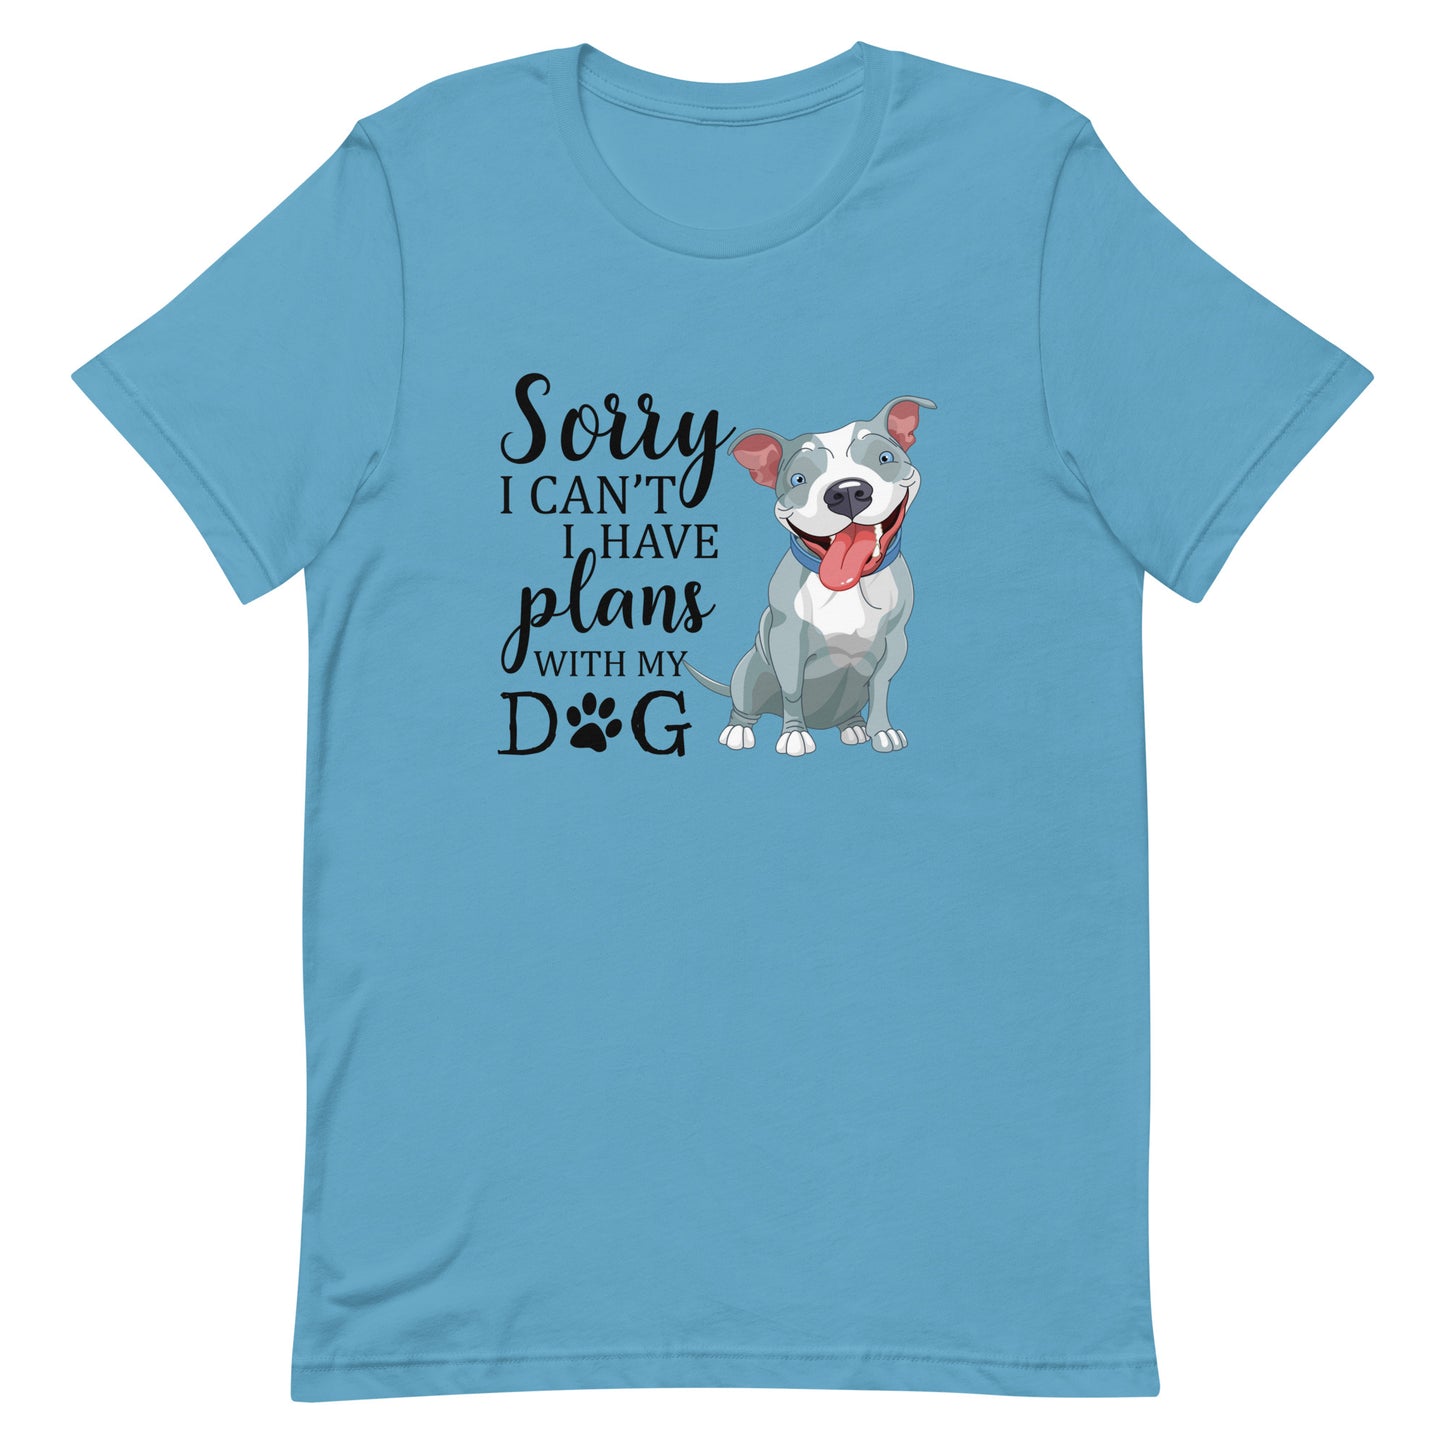 Sorry I Can't I Have Plans with My Dog T-Shirt